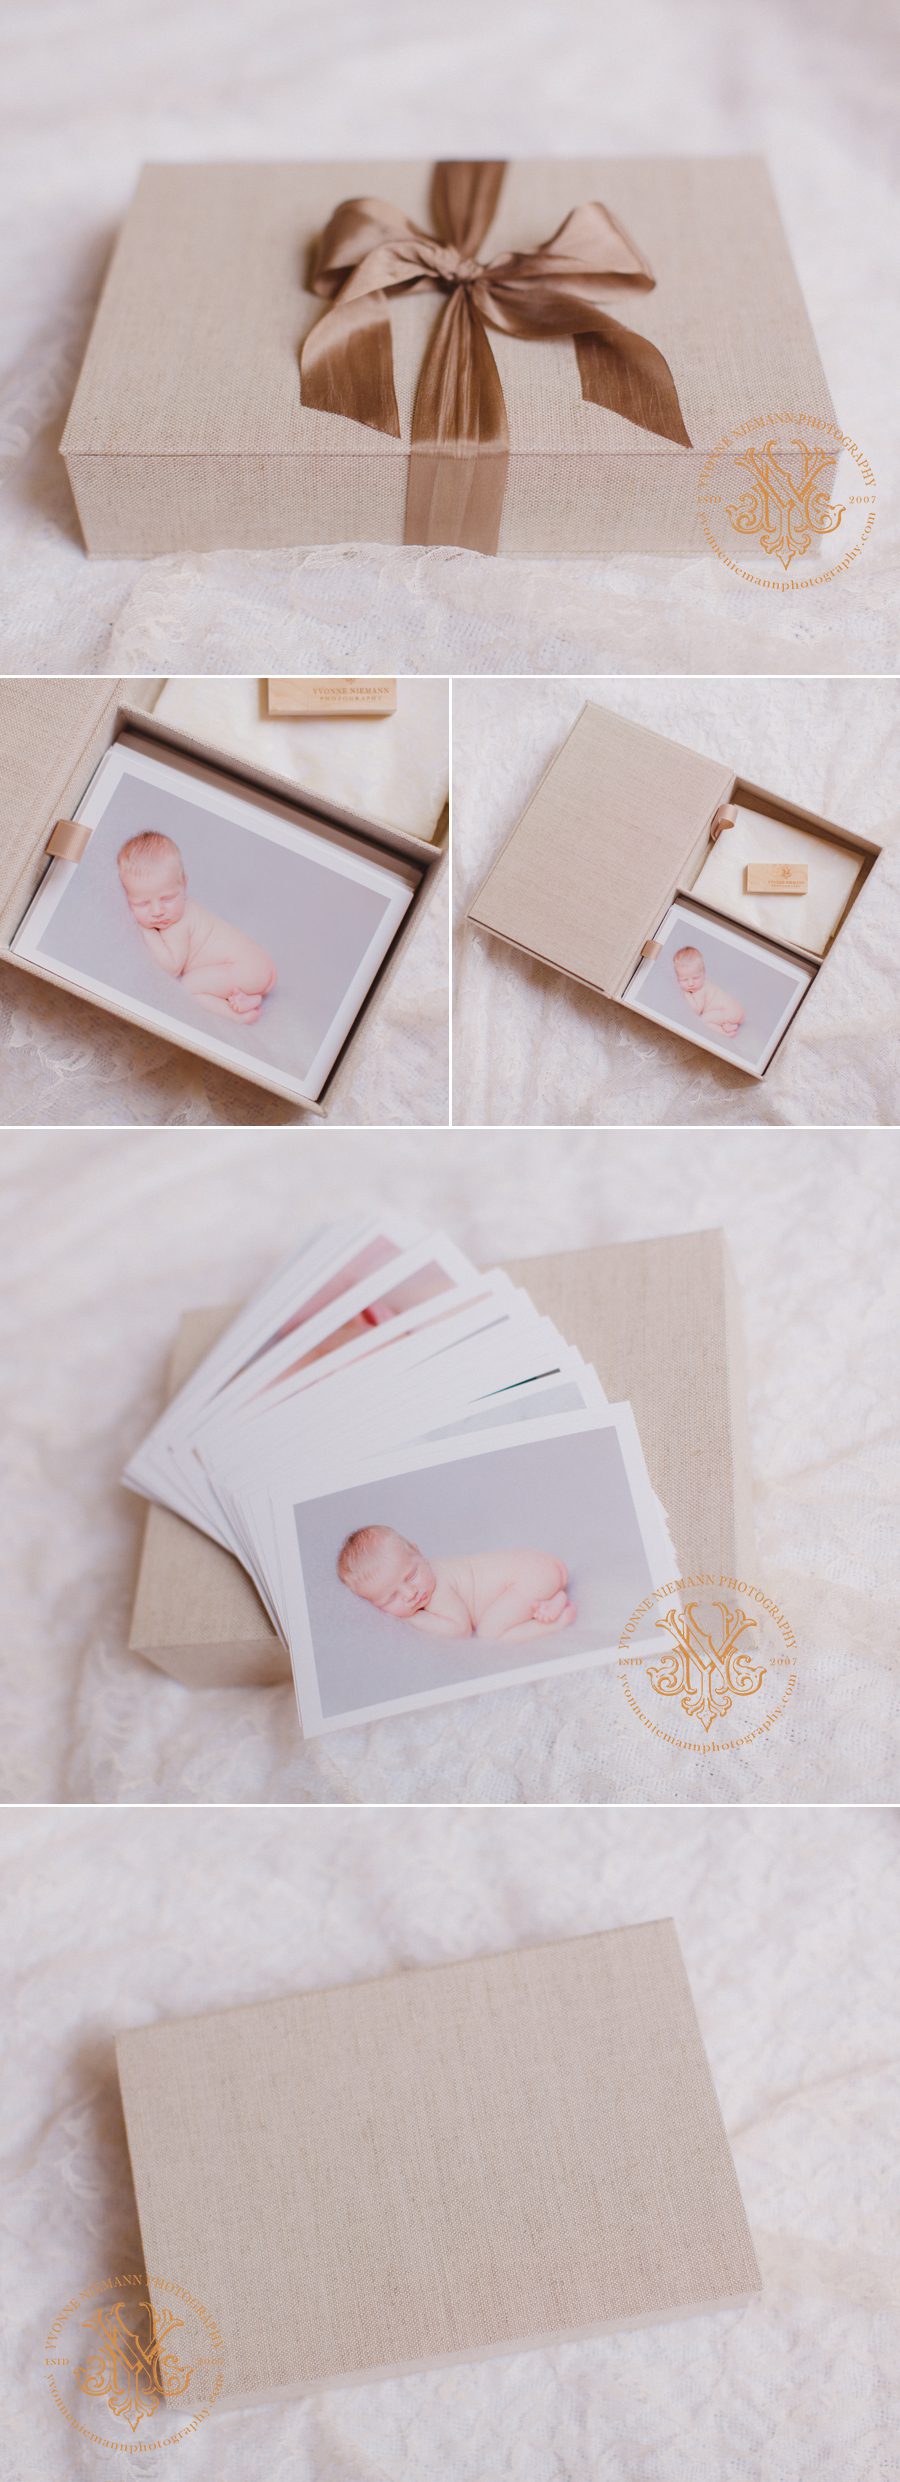 Newborn photos in an image box covered in linen offered by Athens, GA newborn photographer, Yvonne Niemann Photography.